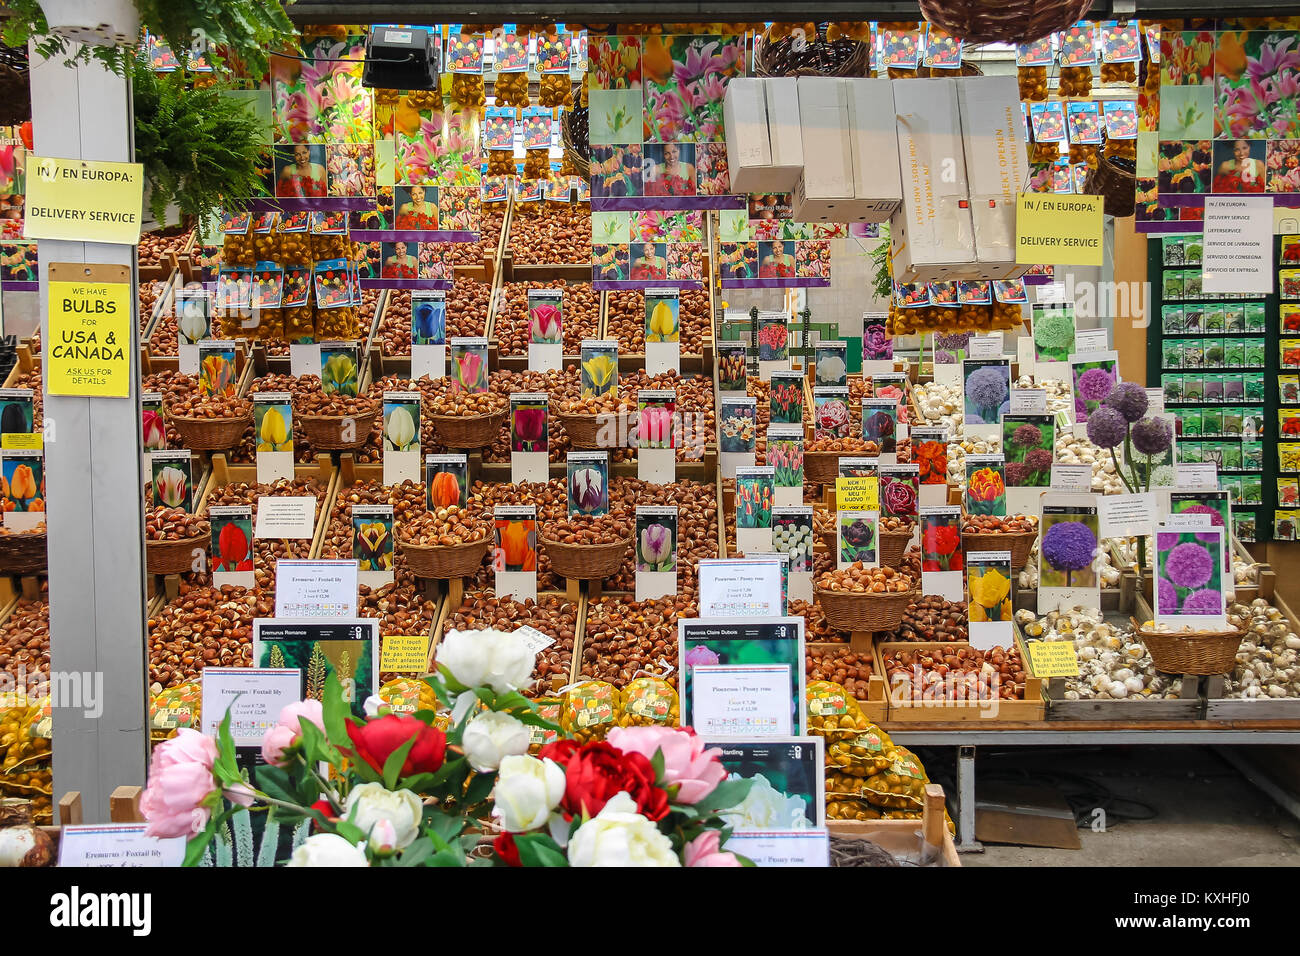 Amsterdam, the Netherlands - October 03, 2015: Flower seeds shop in the city center Stock Photo